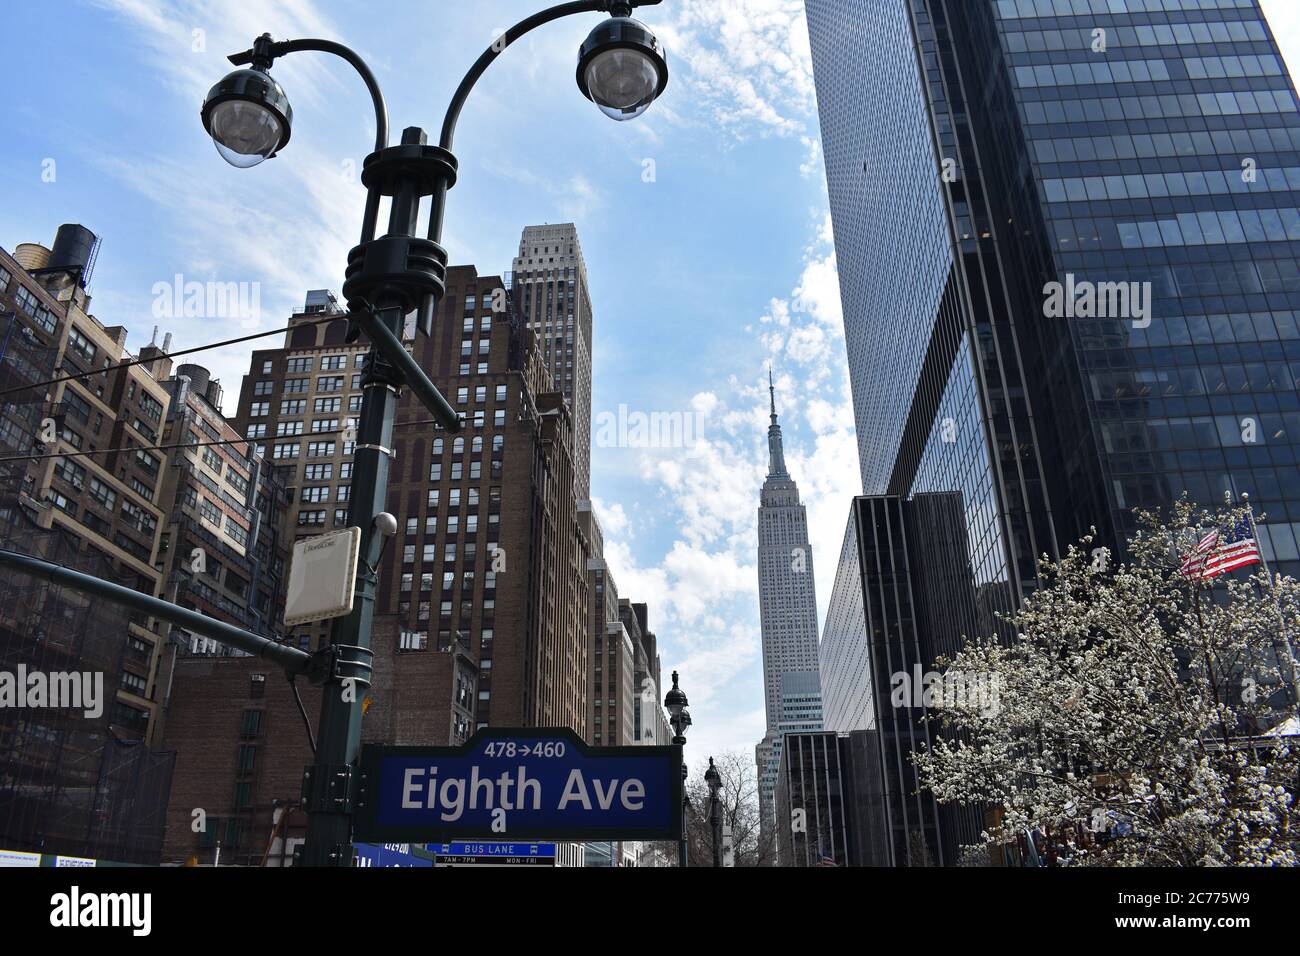 A view of the Empire State Building from Eighth Avenue. On one side is modern black building and older art deco buildings on the other. Stock Photo